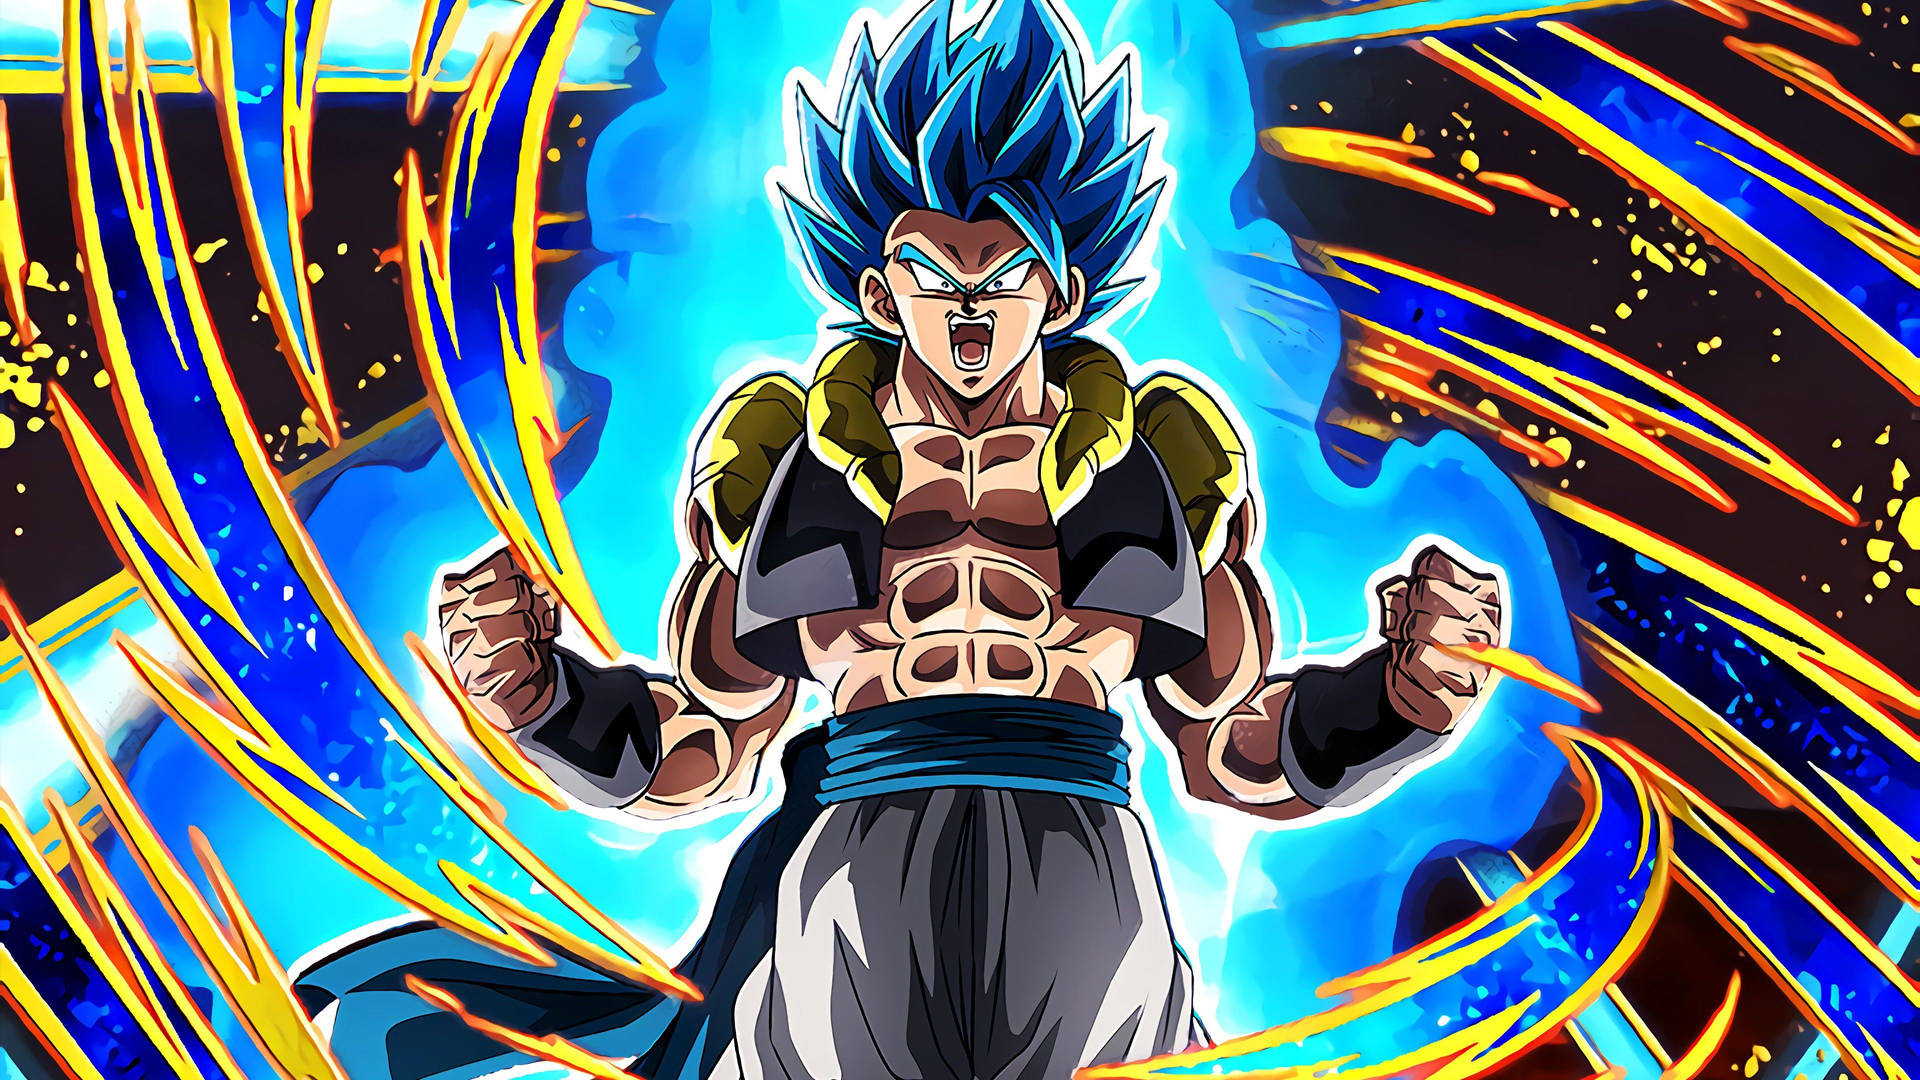 Take On The Challenge With Gogeta In Dragon Ball Super! Wallpaper